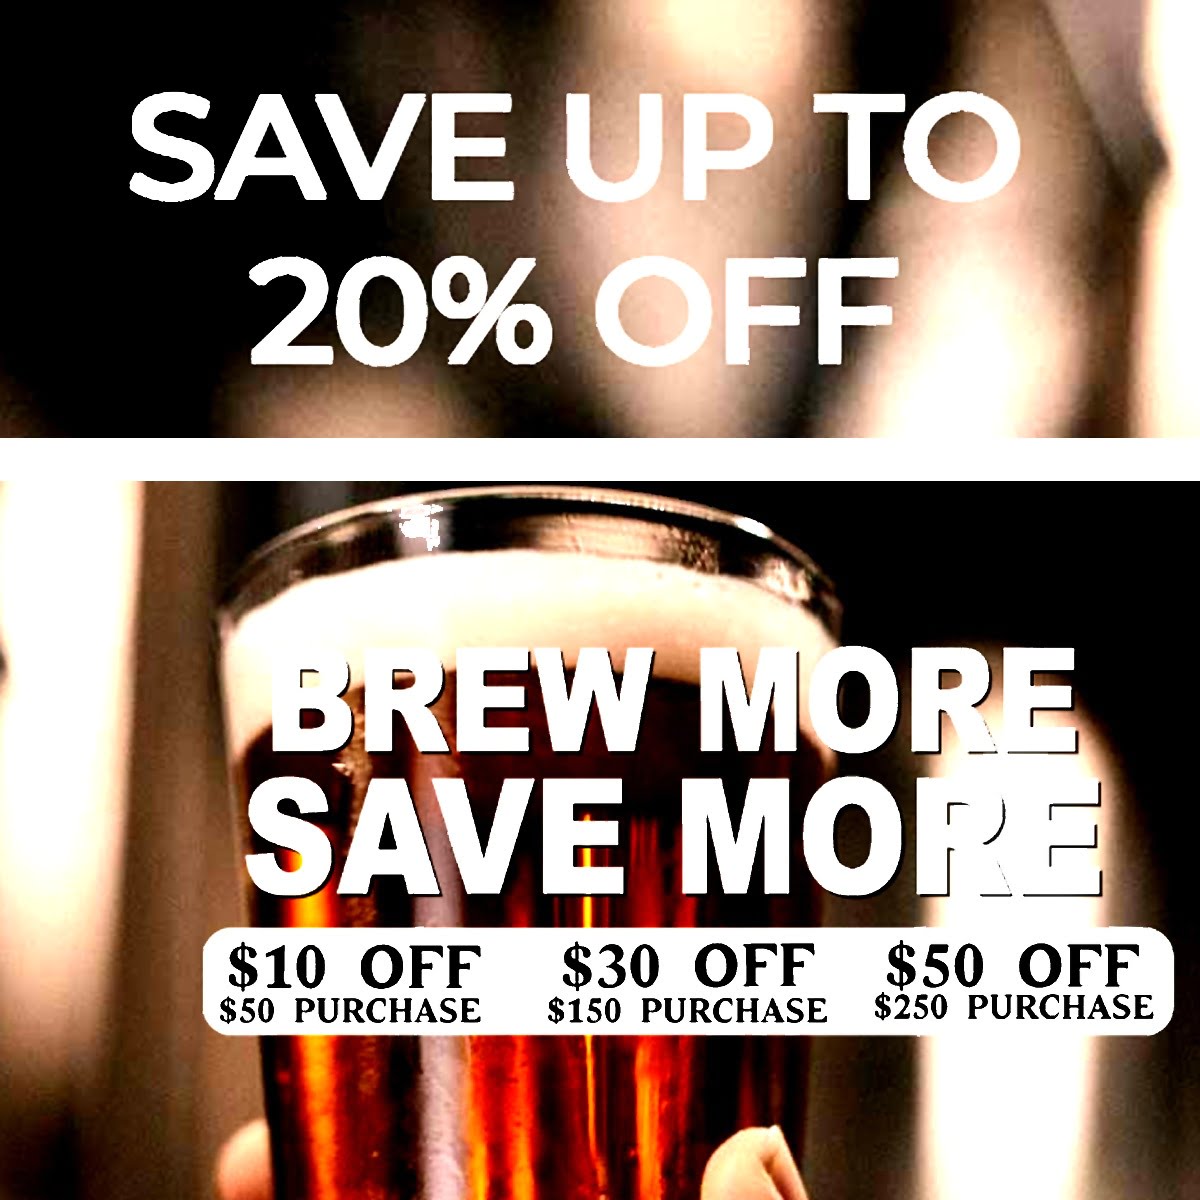 Adventures In Homebrewing Discount, Save $50 Now Until August 4th!